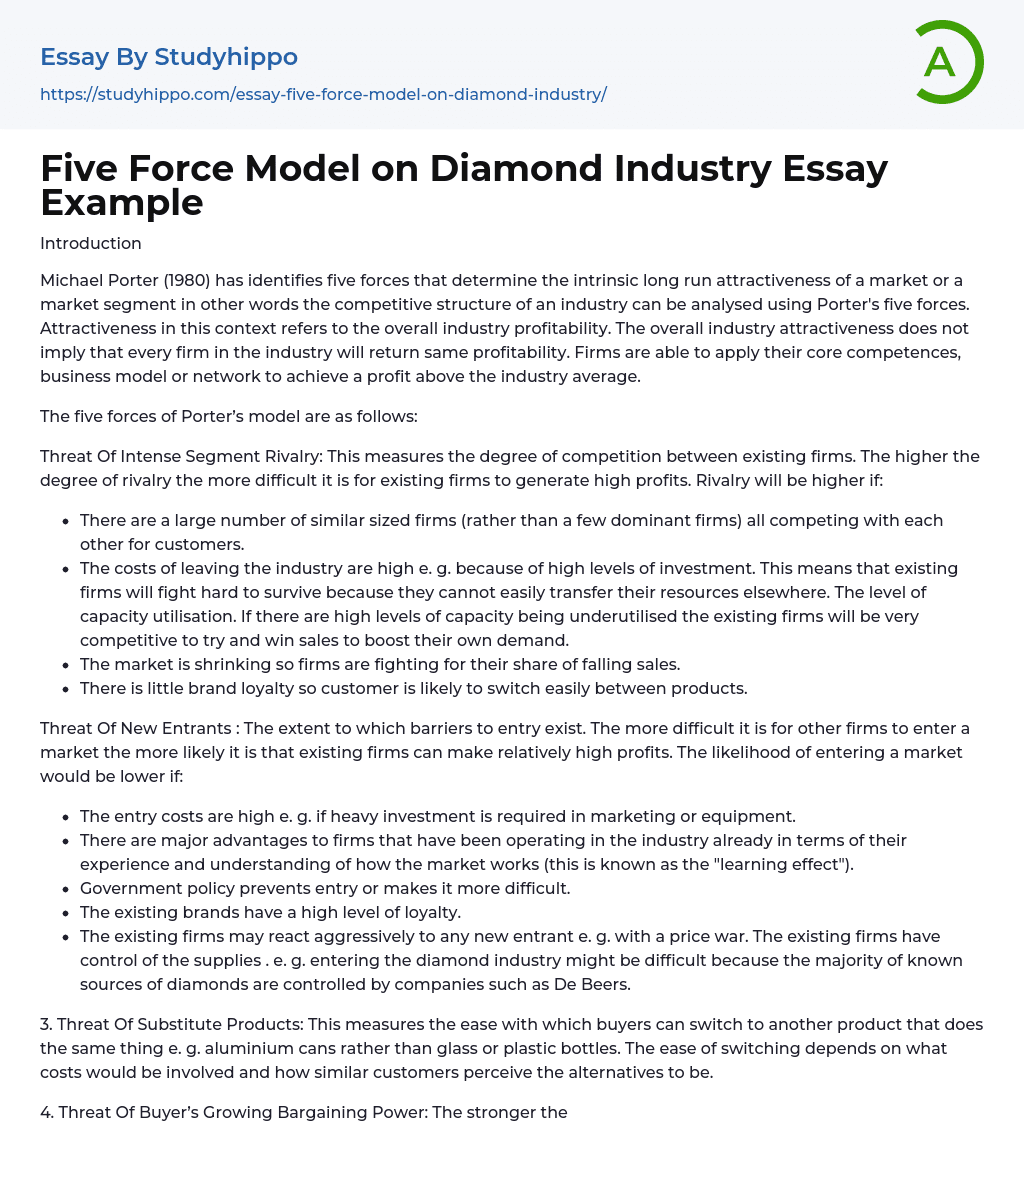 Five Force Model on Diamond Industry Essay Example